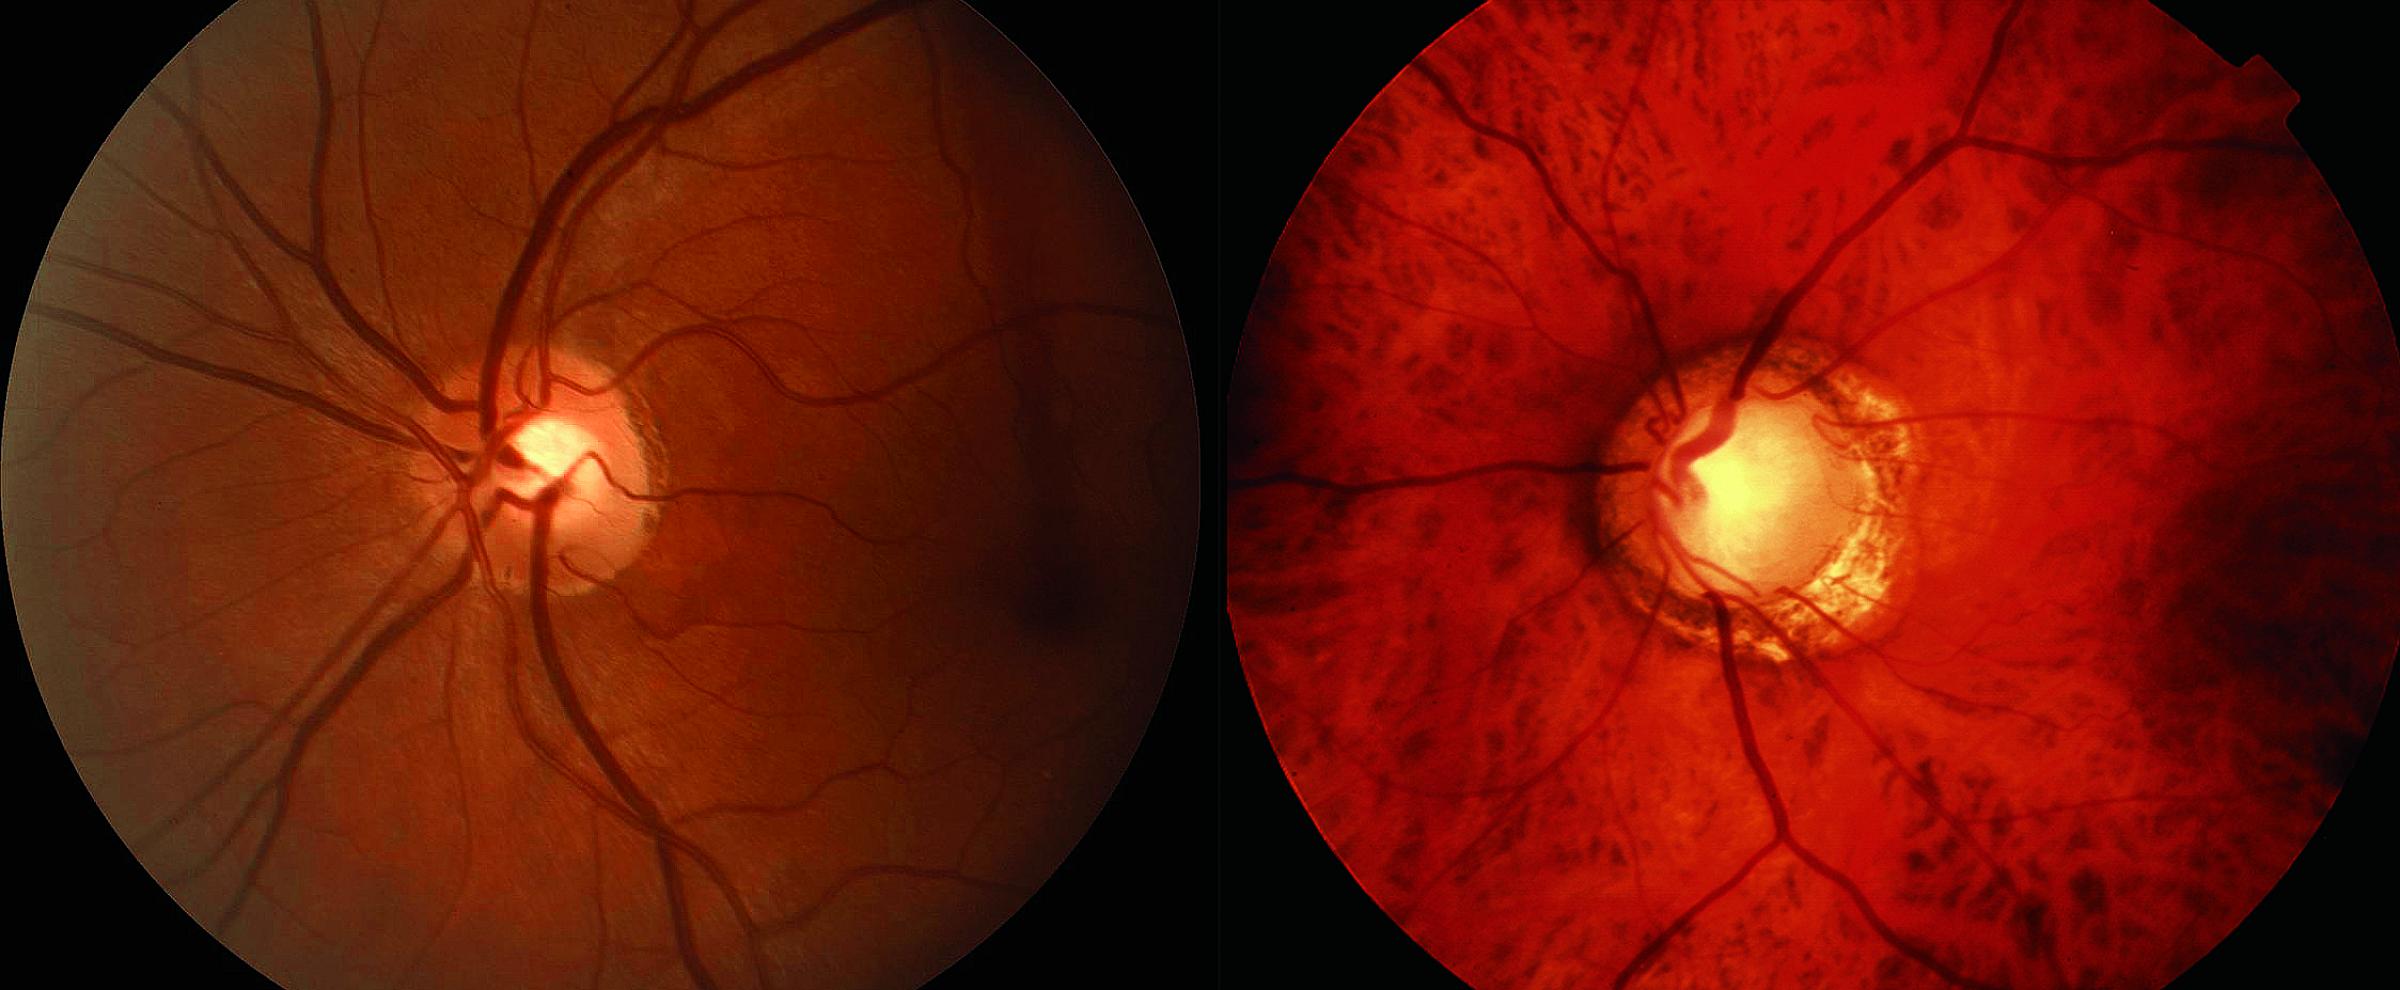 A healthy optic nerve, left, and one damaged by glaucoma.